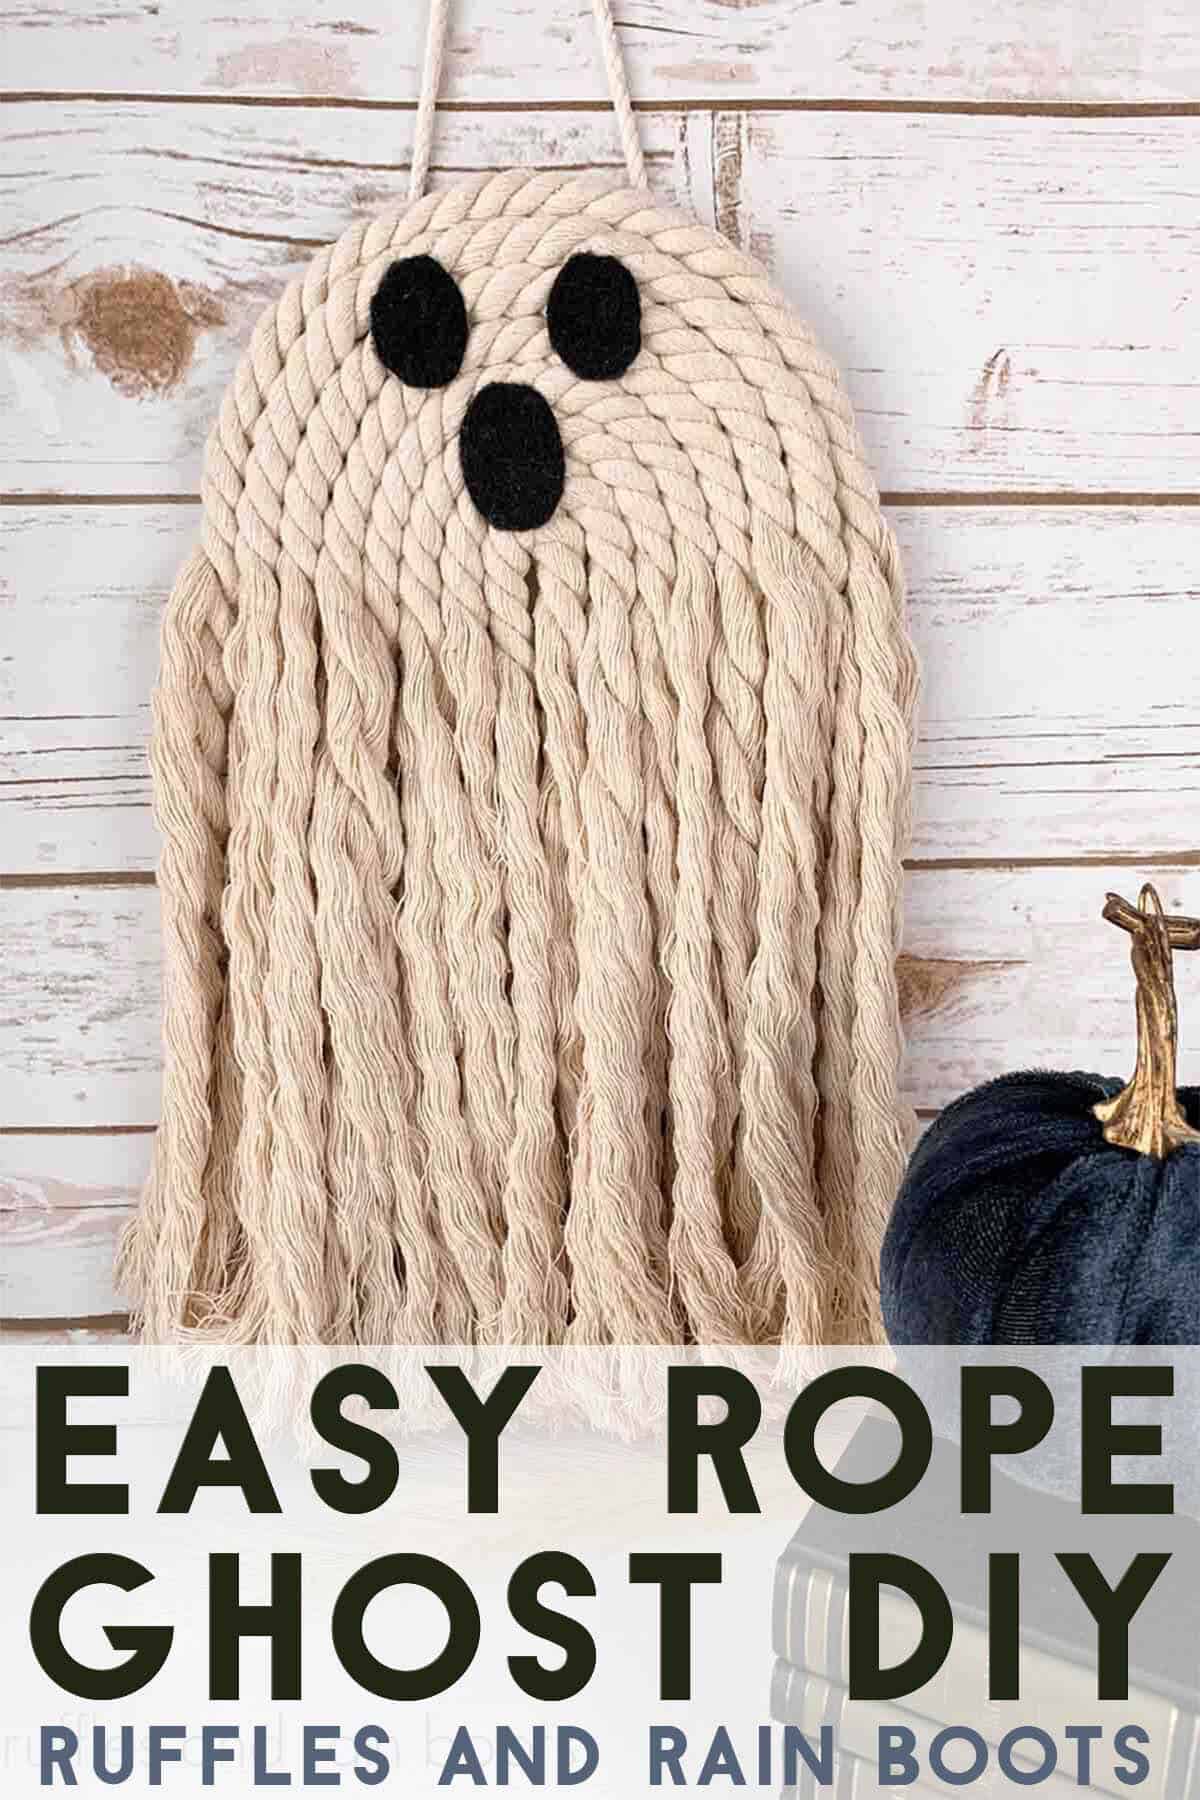 Macrame ghost wall hanging with text which reads easy rope ghost DIY.